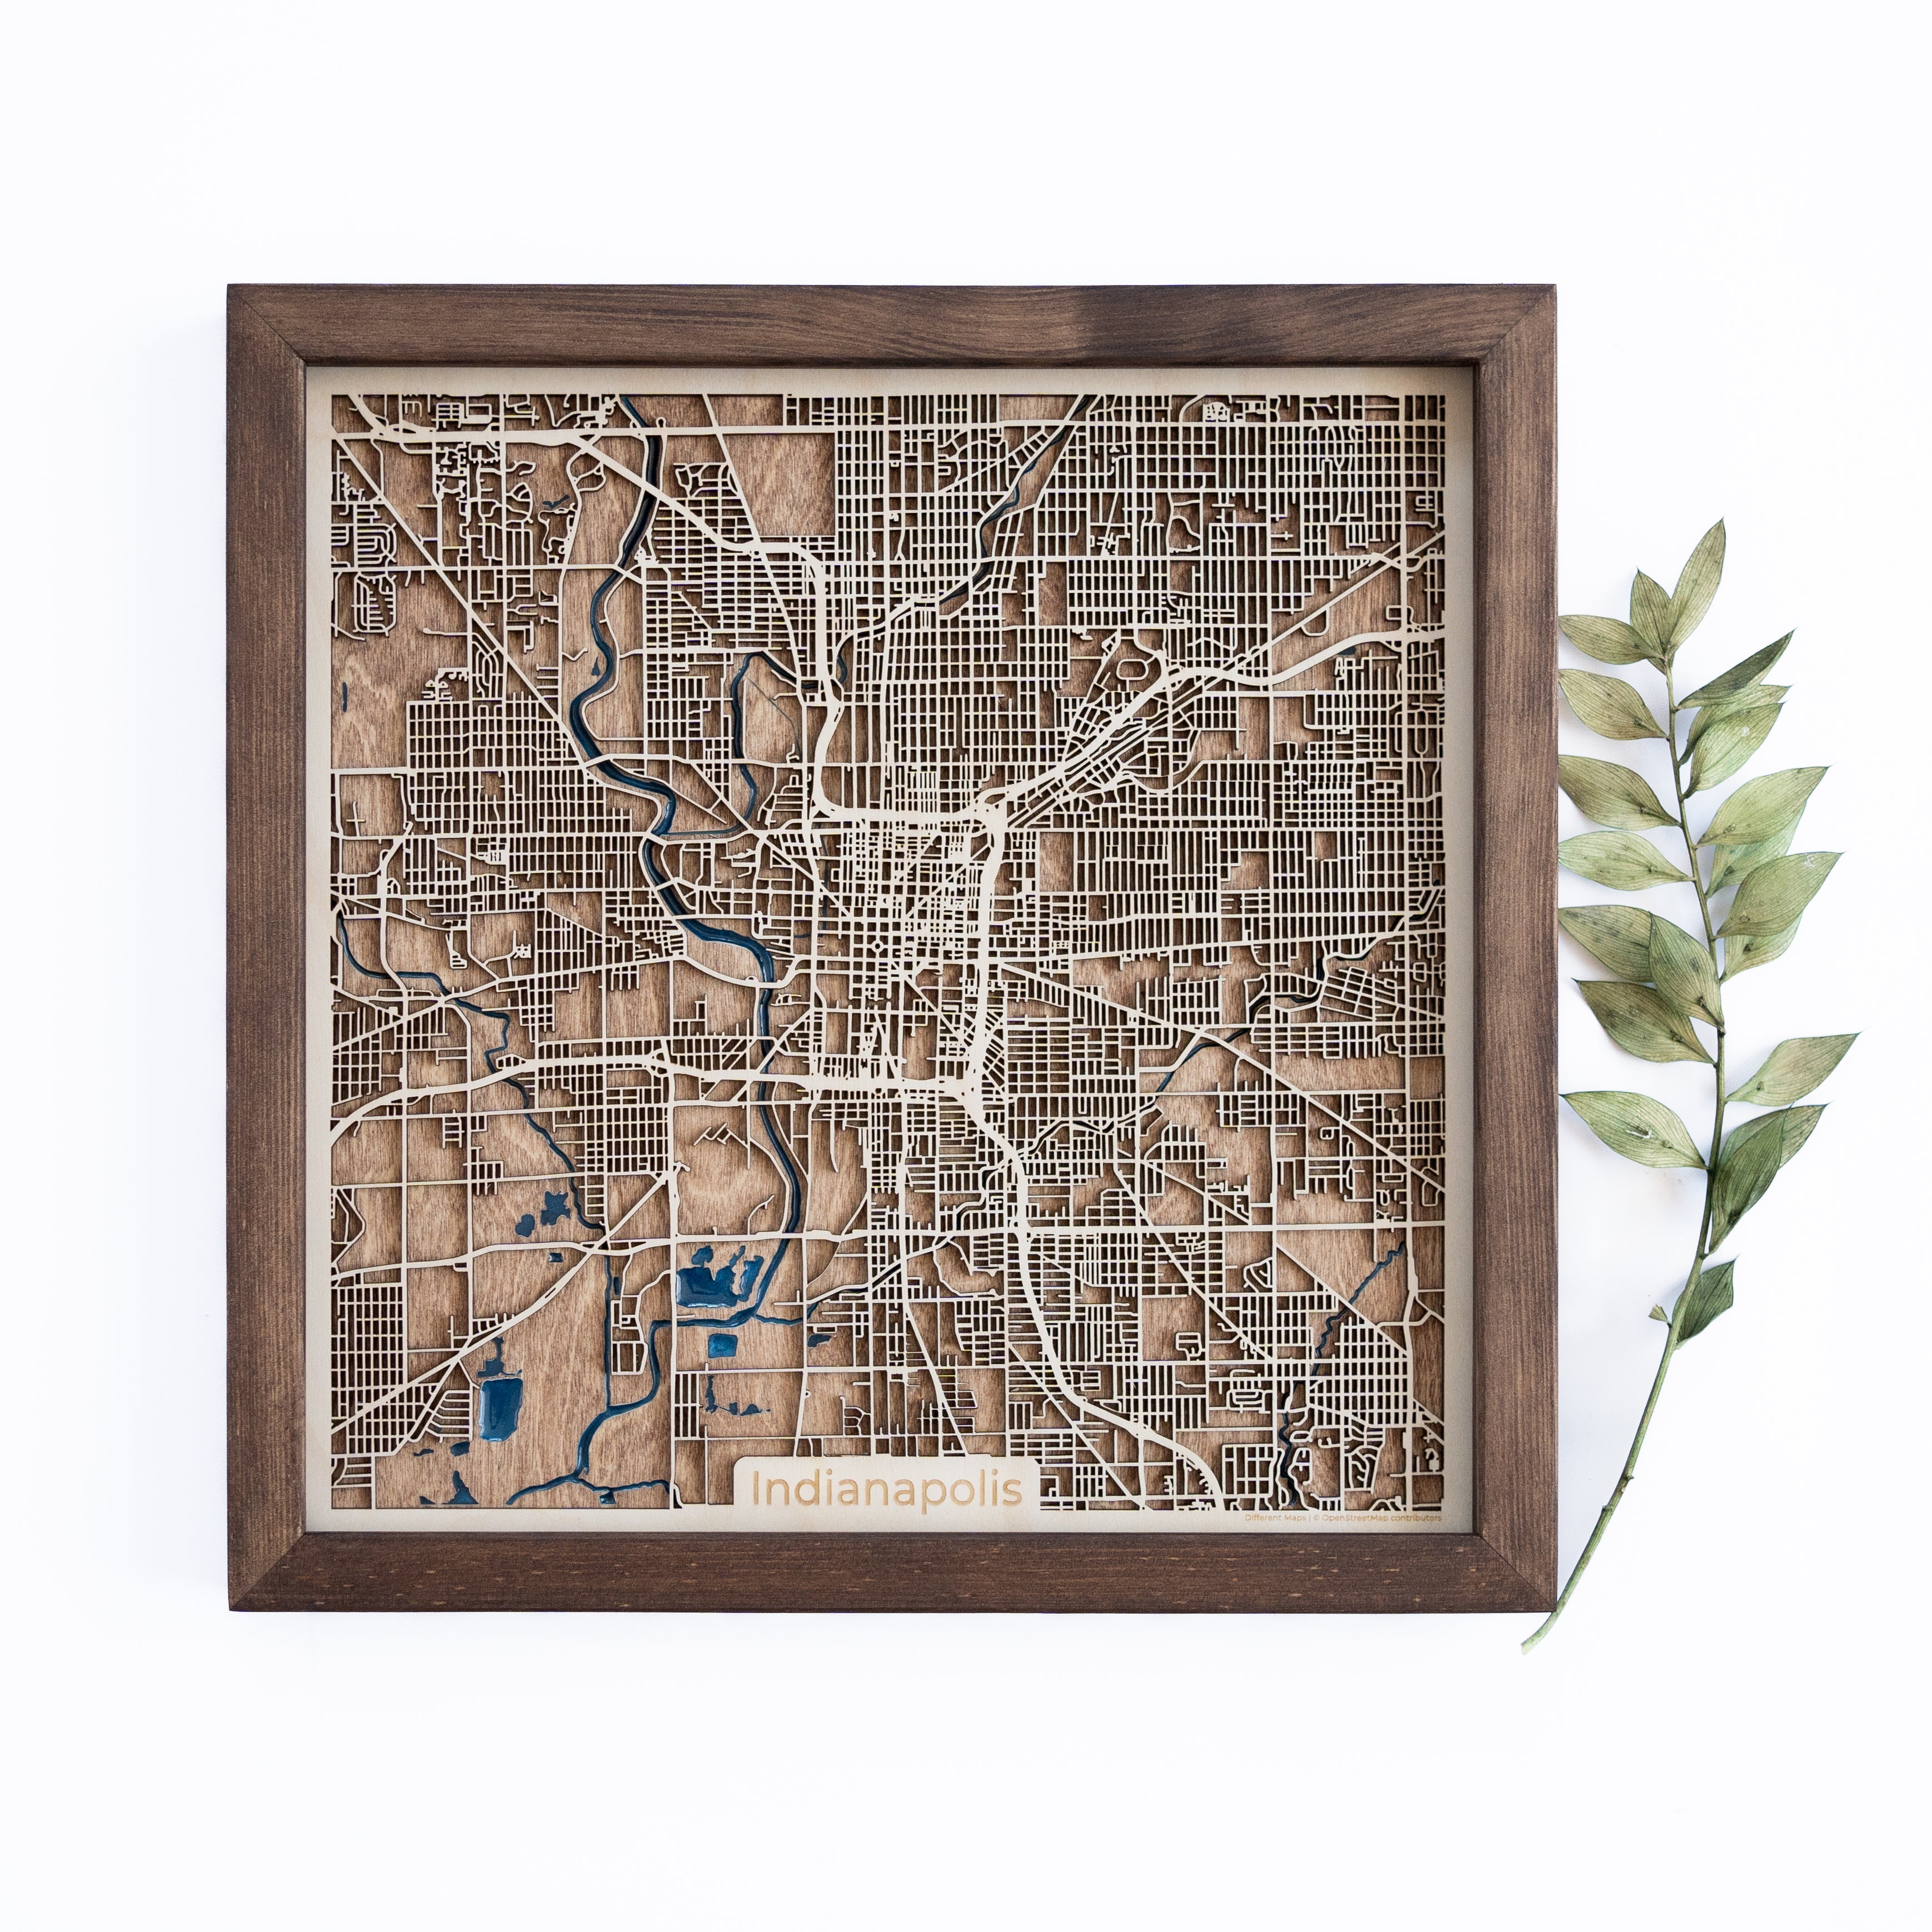 Transform your wall decor with our captivating Indianapolis Map, a perfect wooden gift for anyone enamored with this beloved city. Indianapolis Map is a stunning addition to any space!